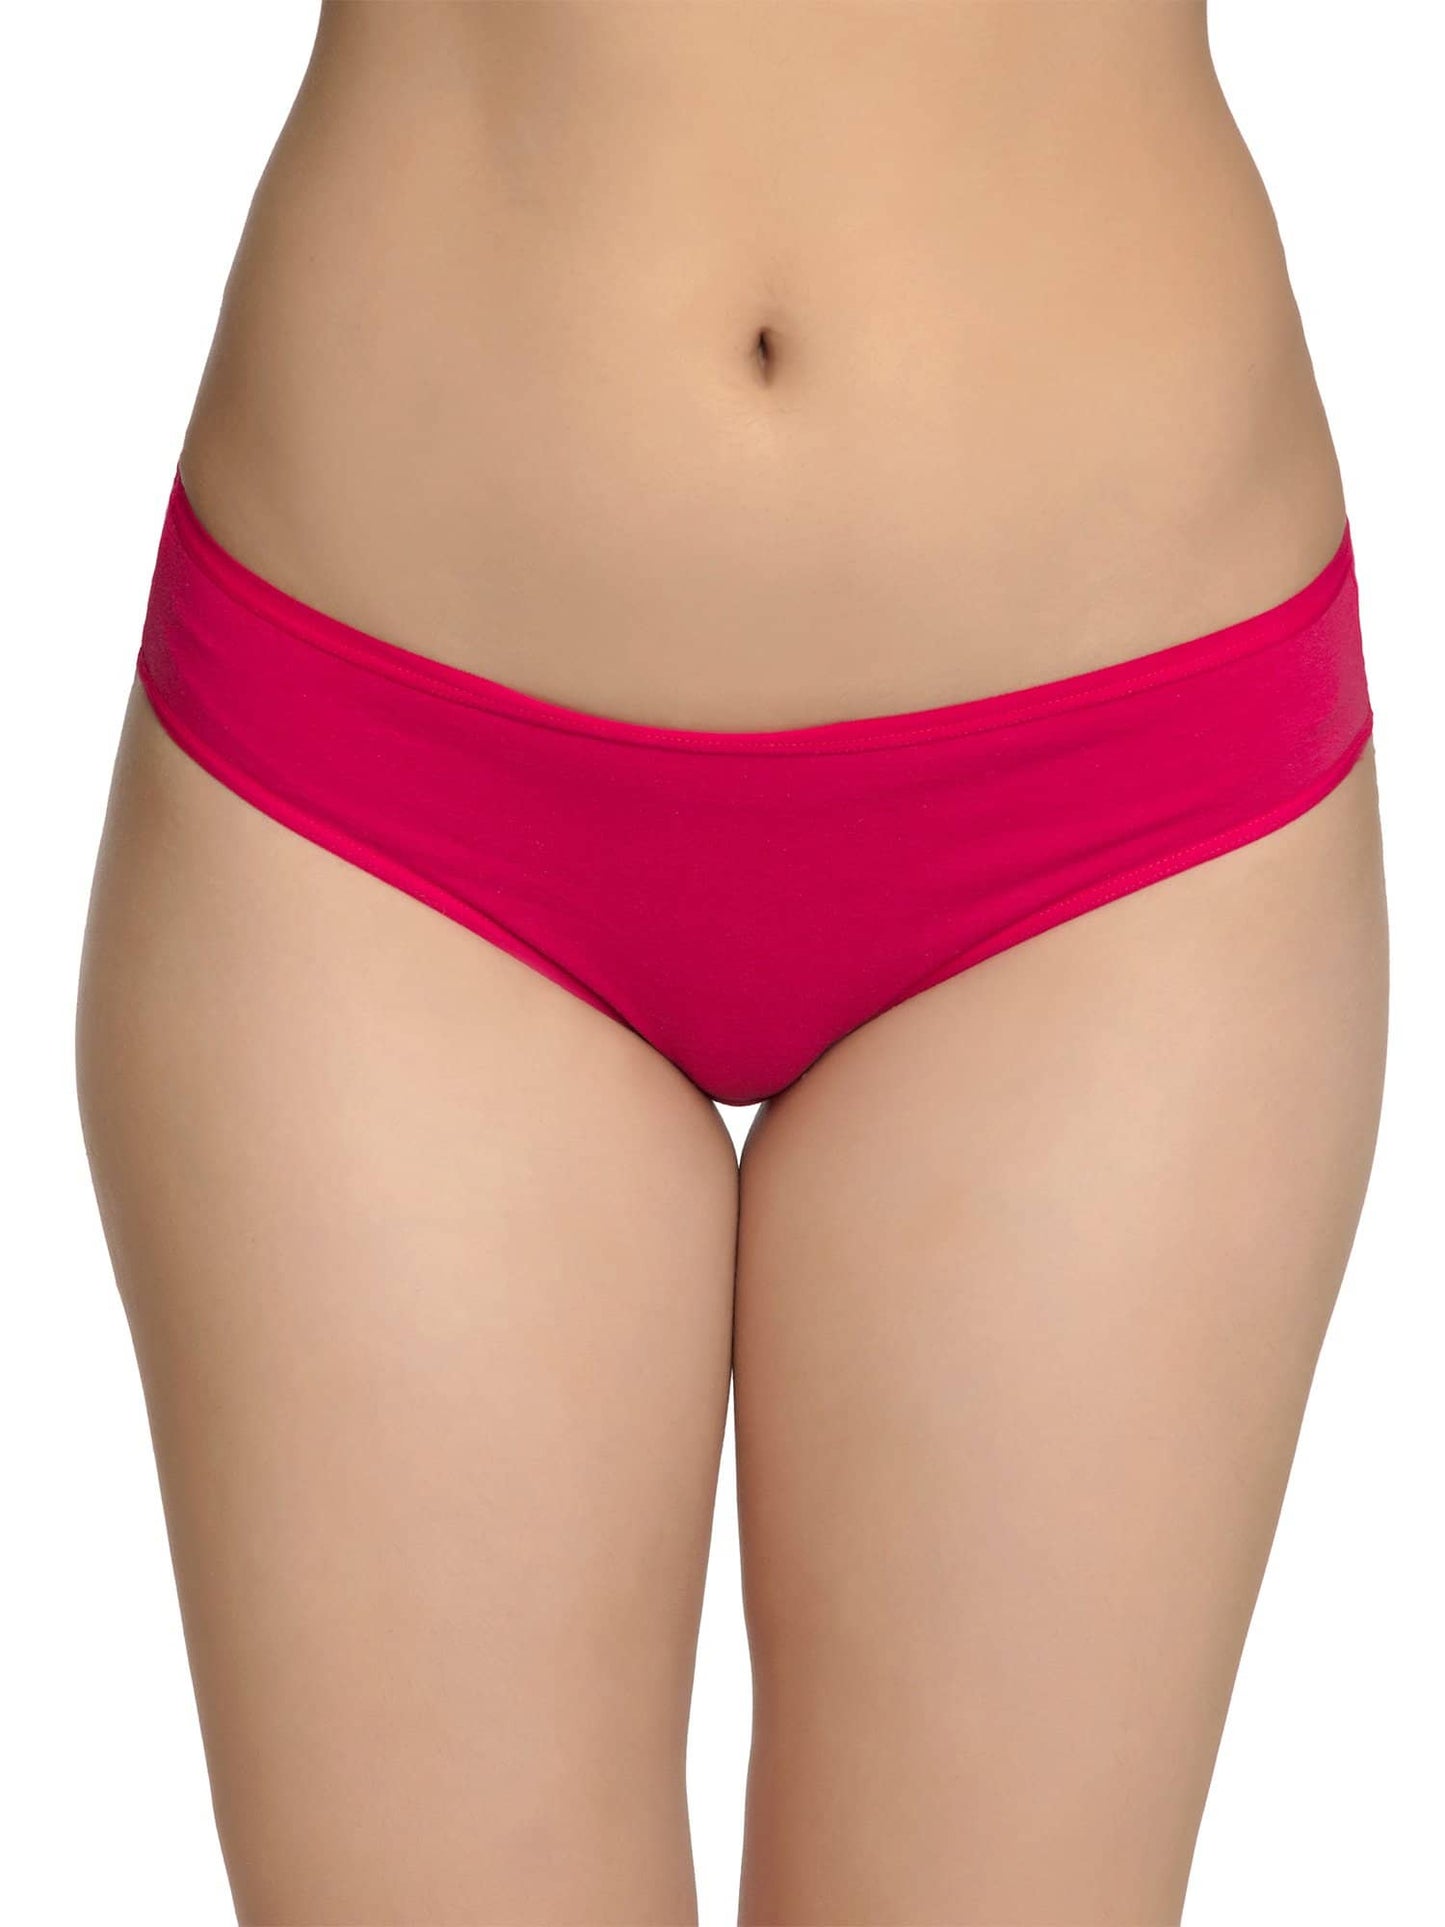 Organic Cotton Antimicrobial Spunky Pink Undies Kit (Pack of 3)-ISPK02-Pink-